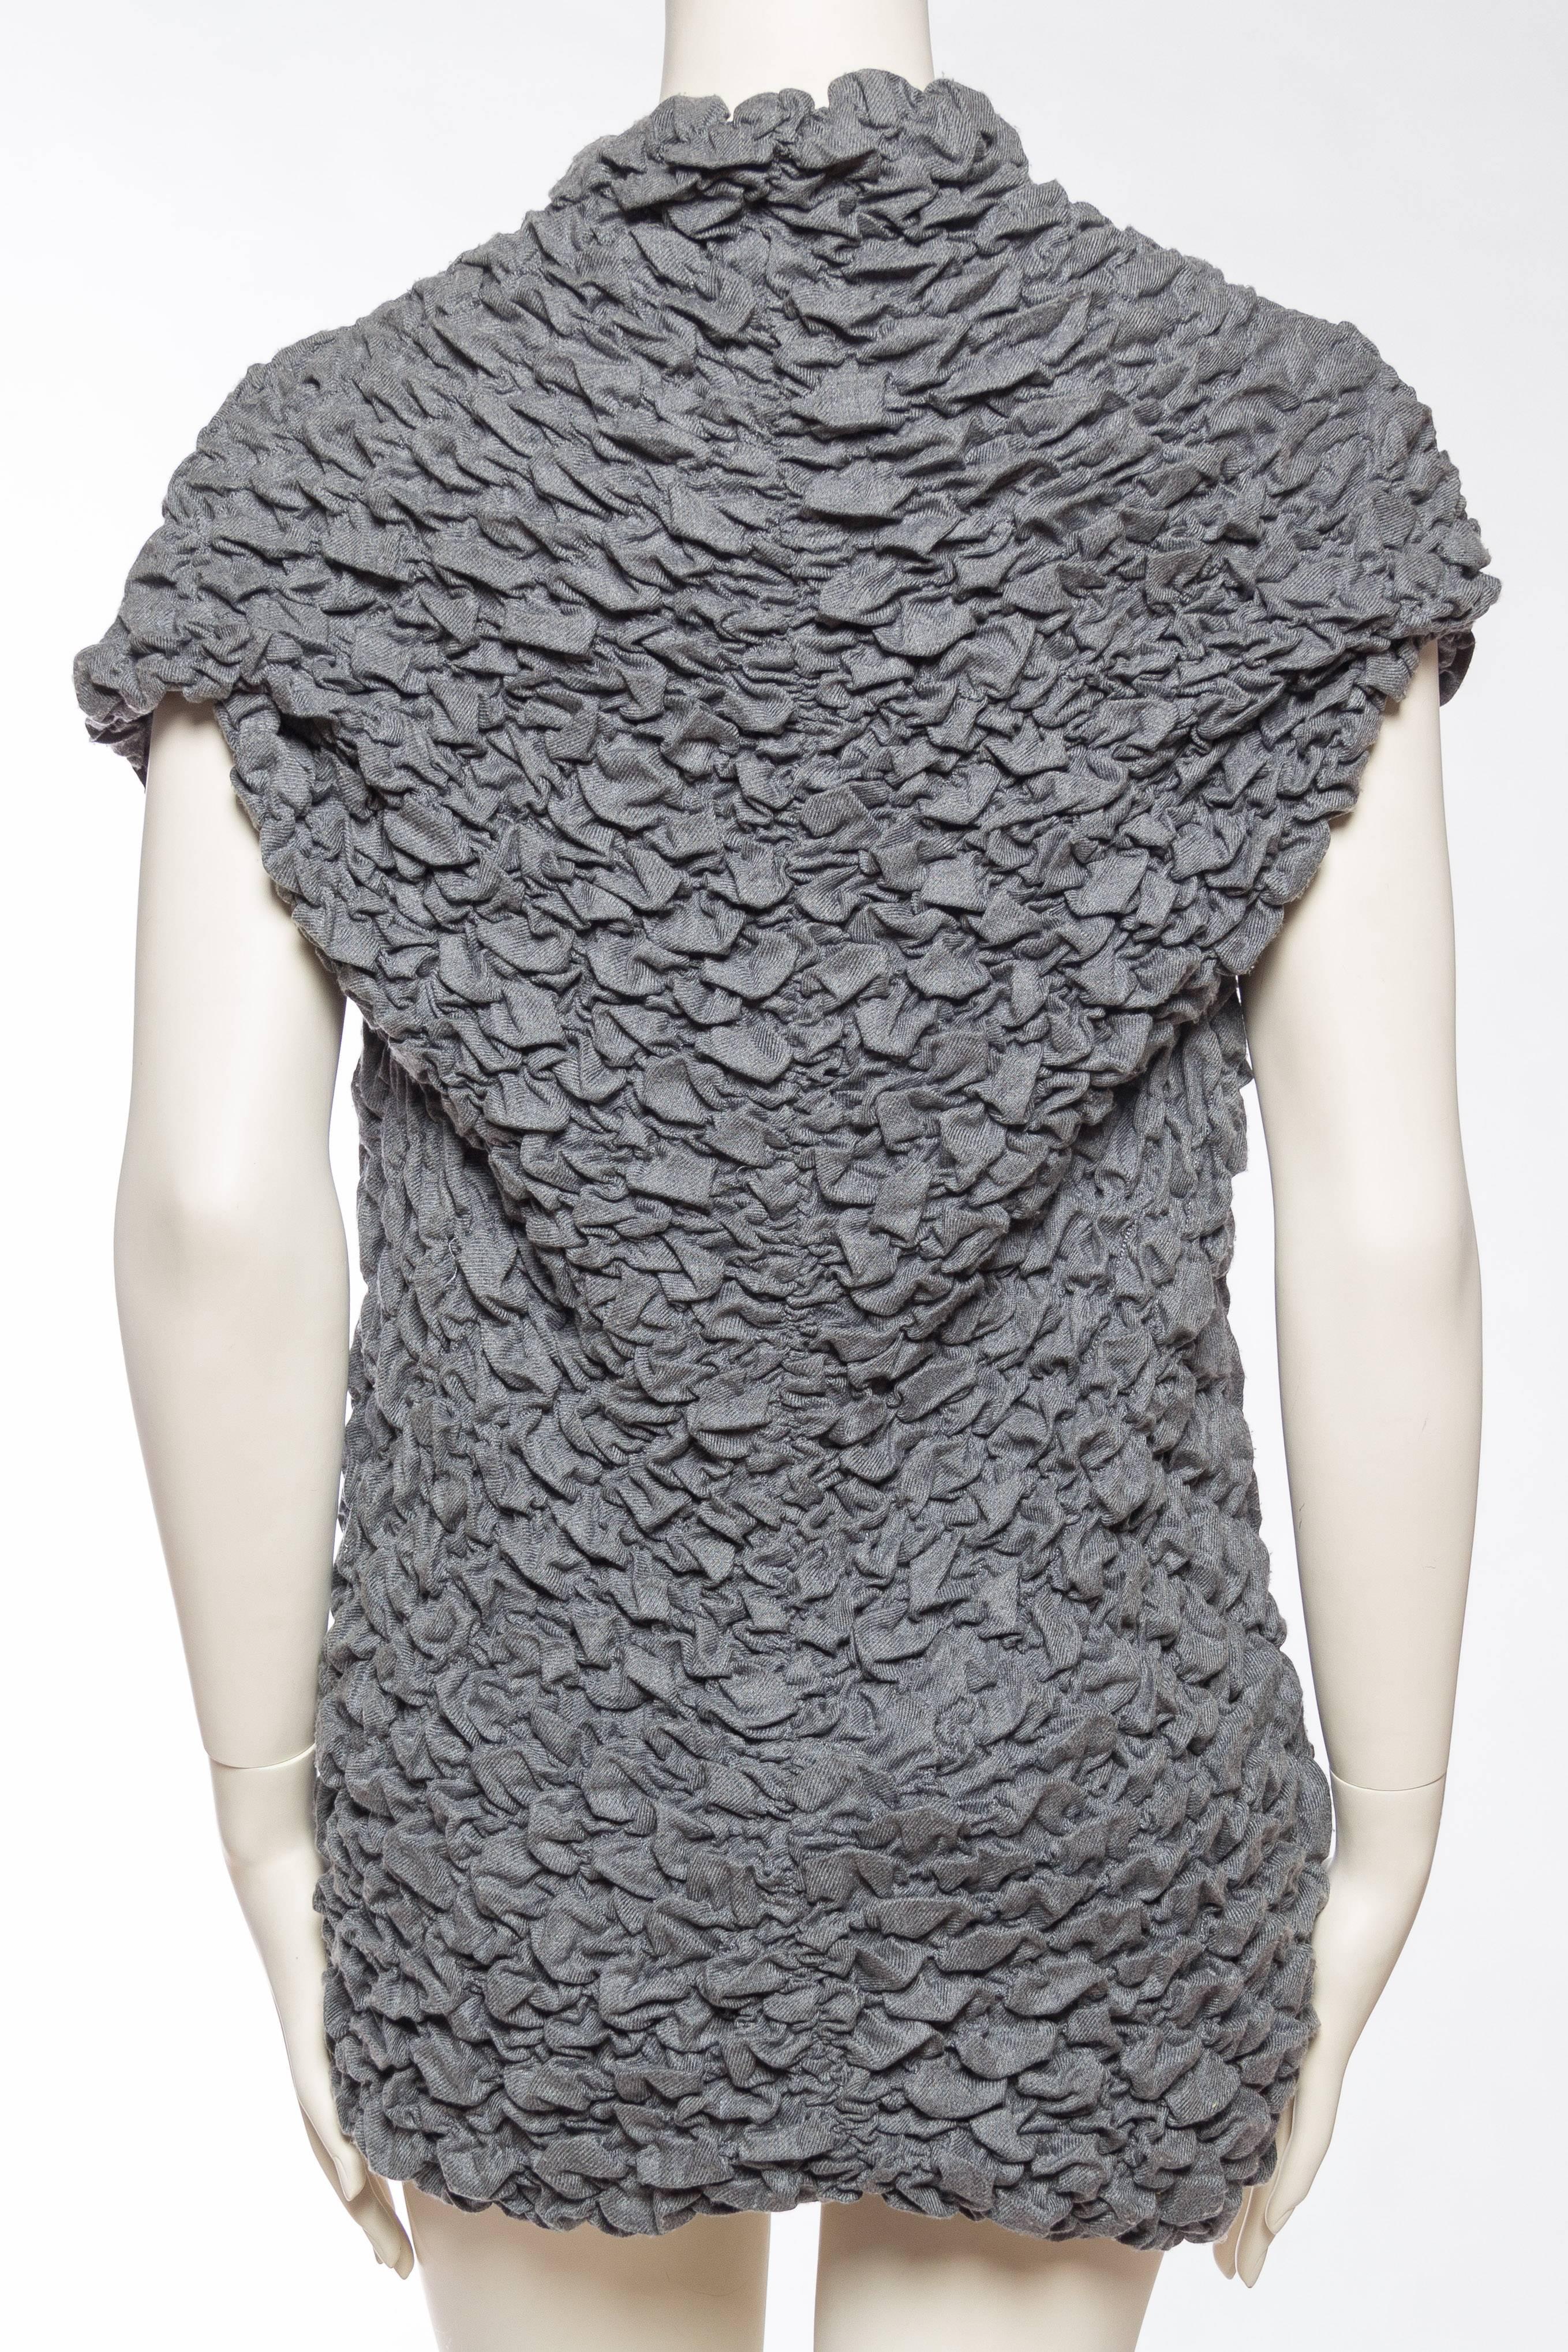 Gray 1990S ALEXANDER MCQUEEN Grey Textured Knit Top From Fall 1999 